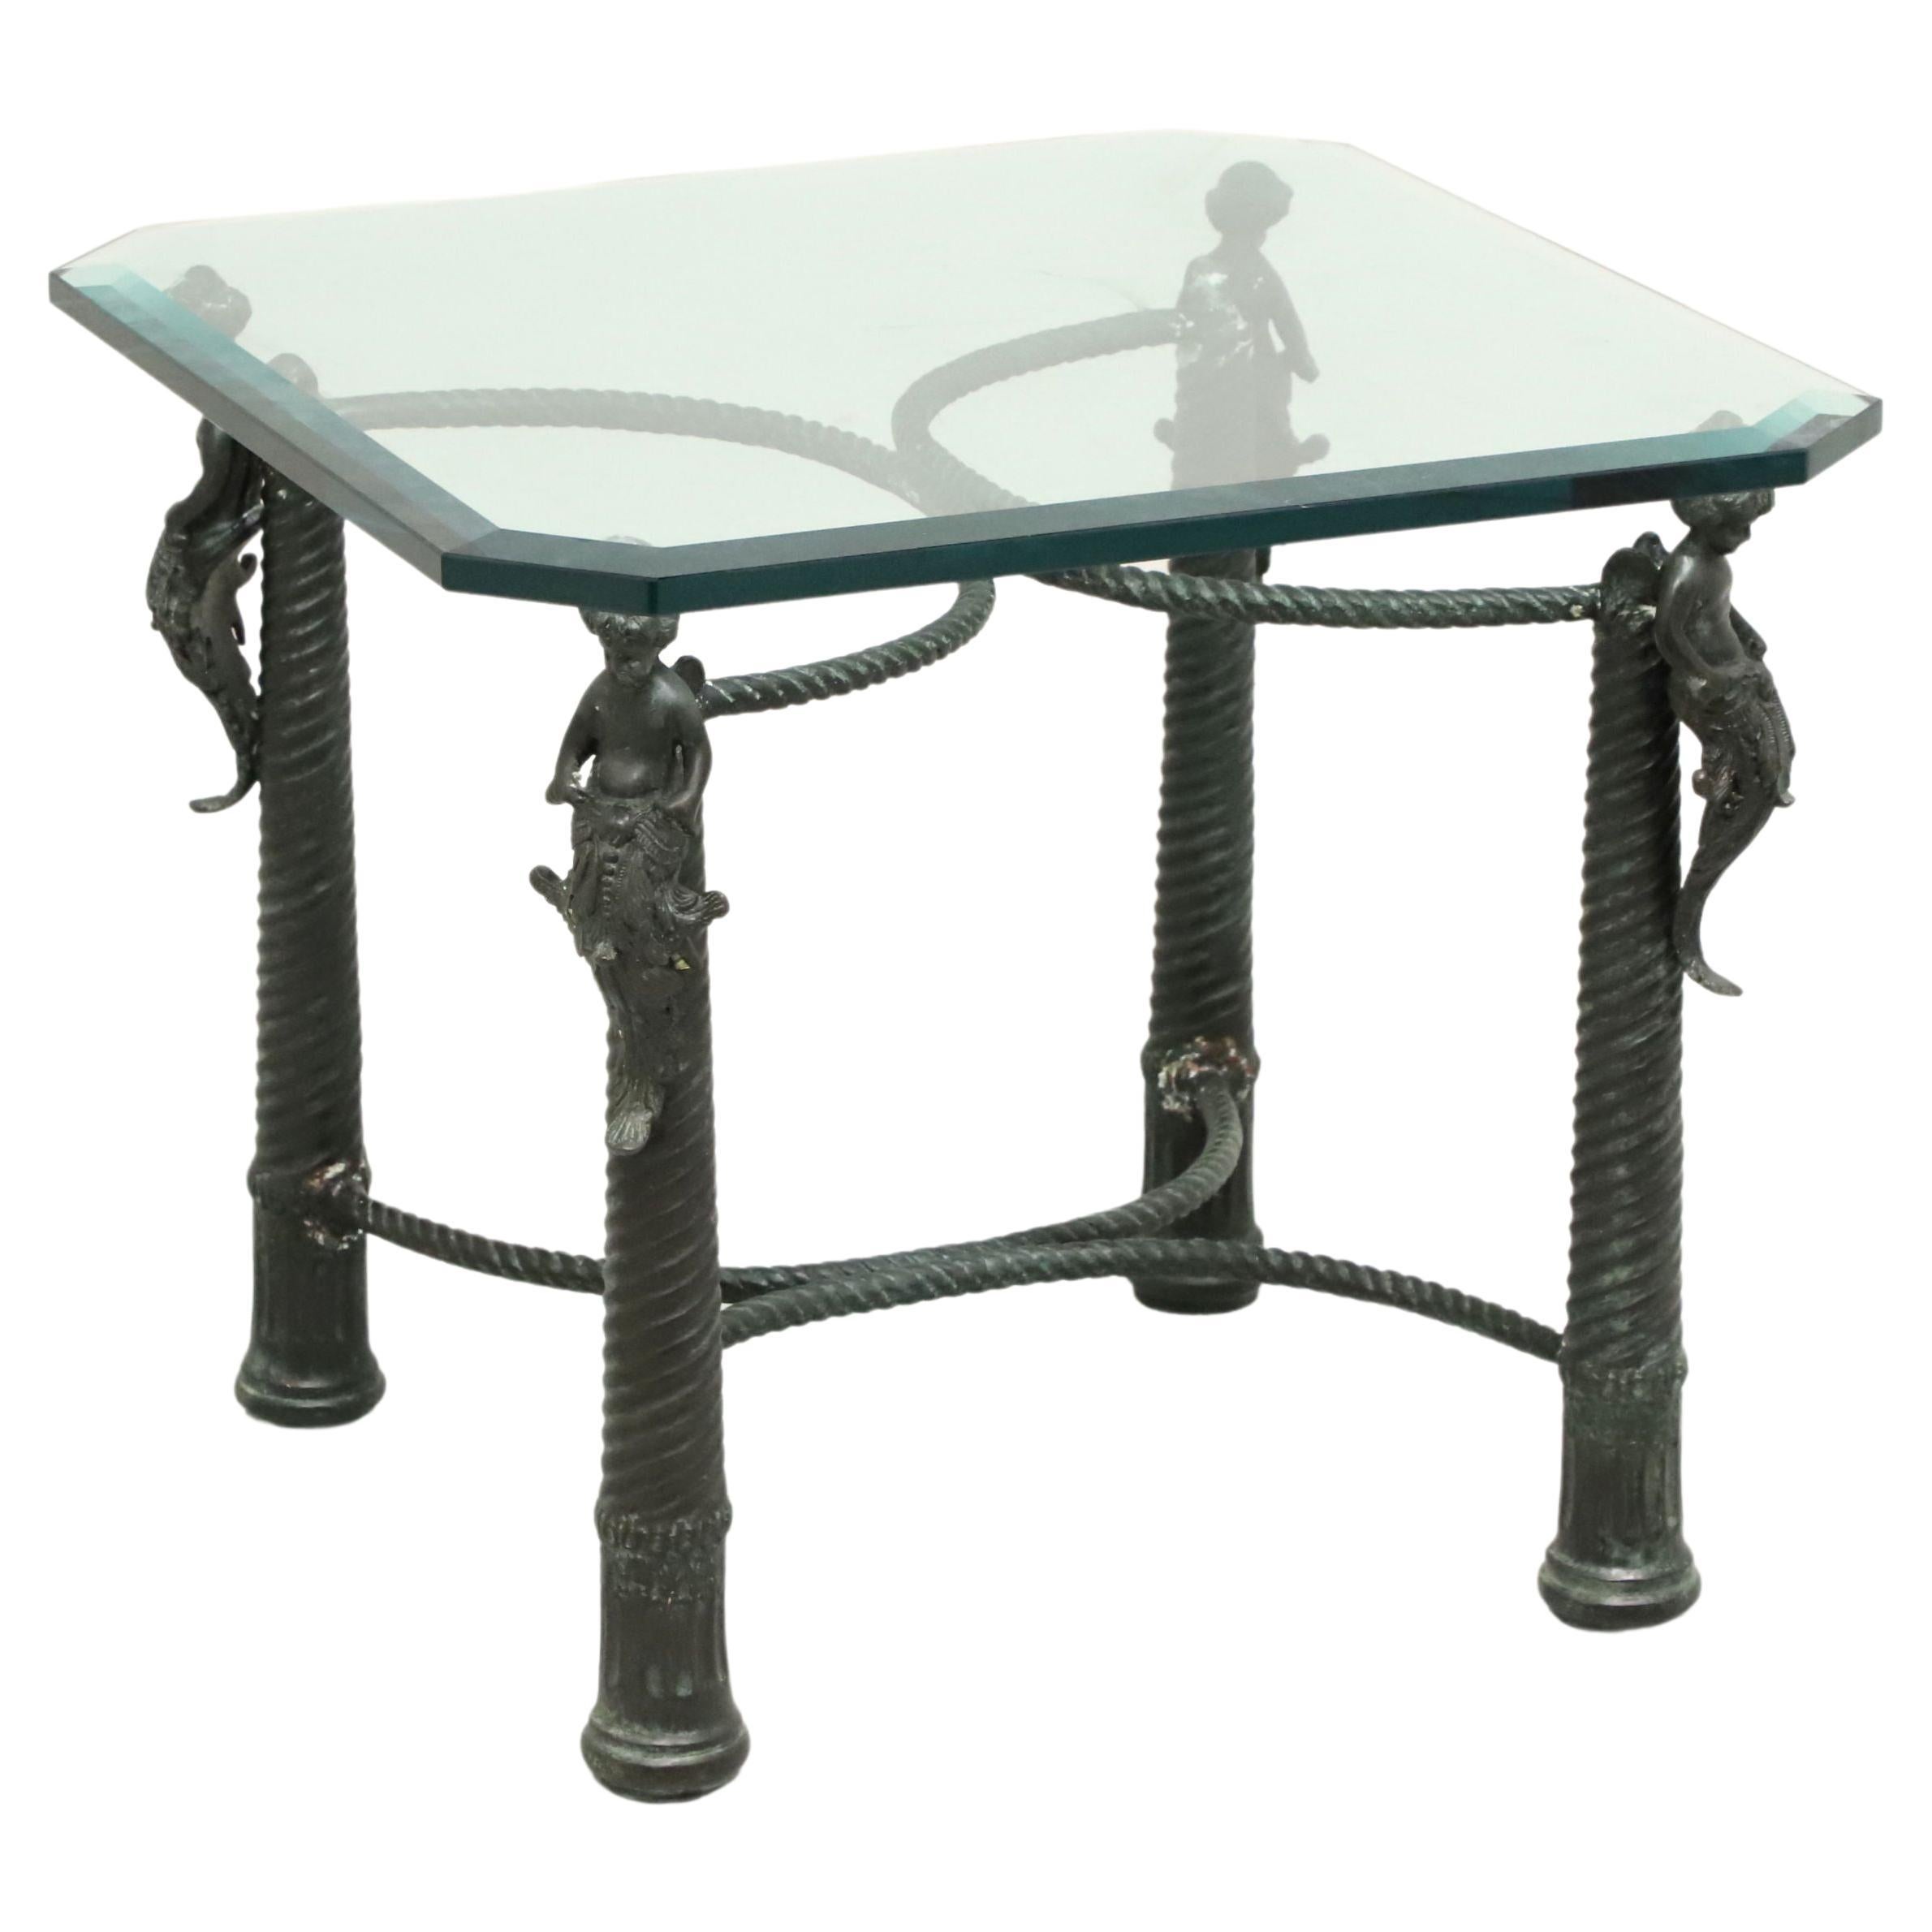 MAITLAND SMITH Patinated Bronze Mermen Square Glass Top Coffee Cocktail Table For Sale